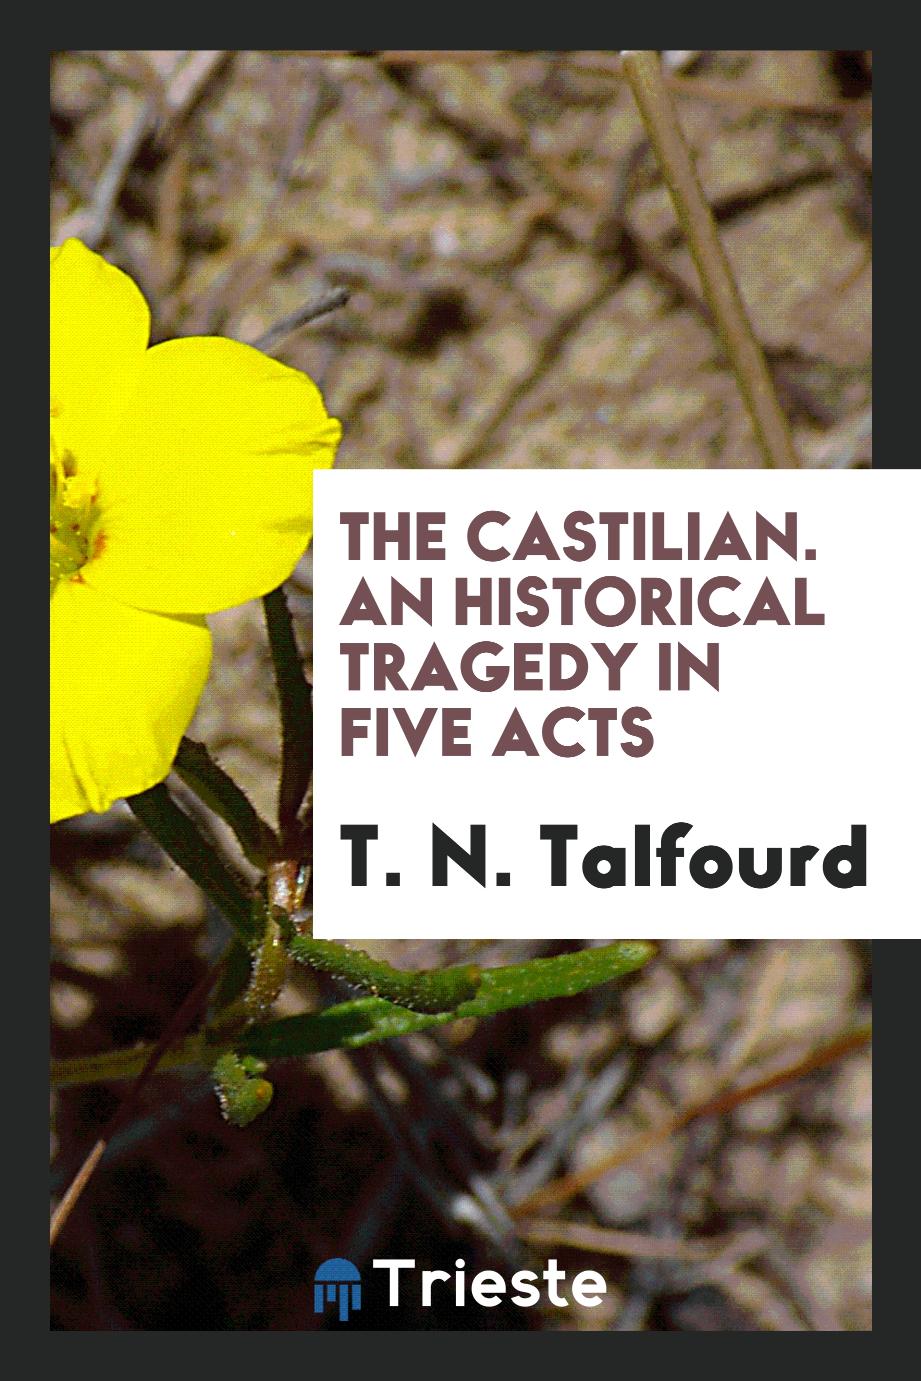 The Castilian. An Historical Tragedy in Five Acts